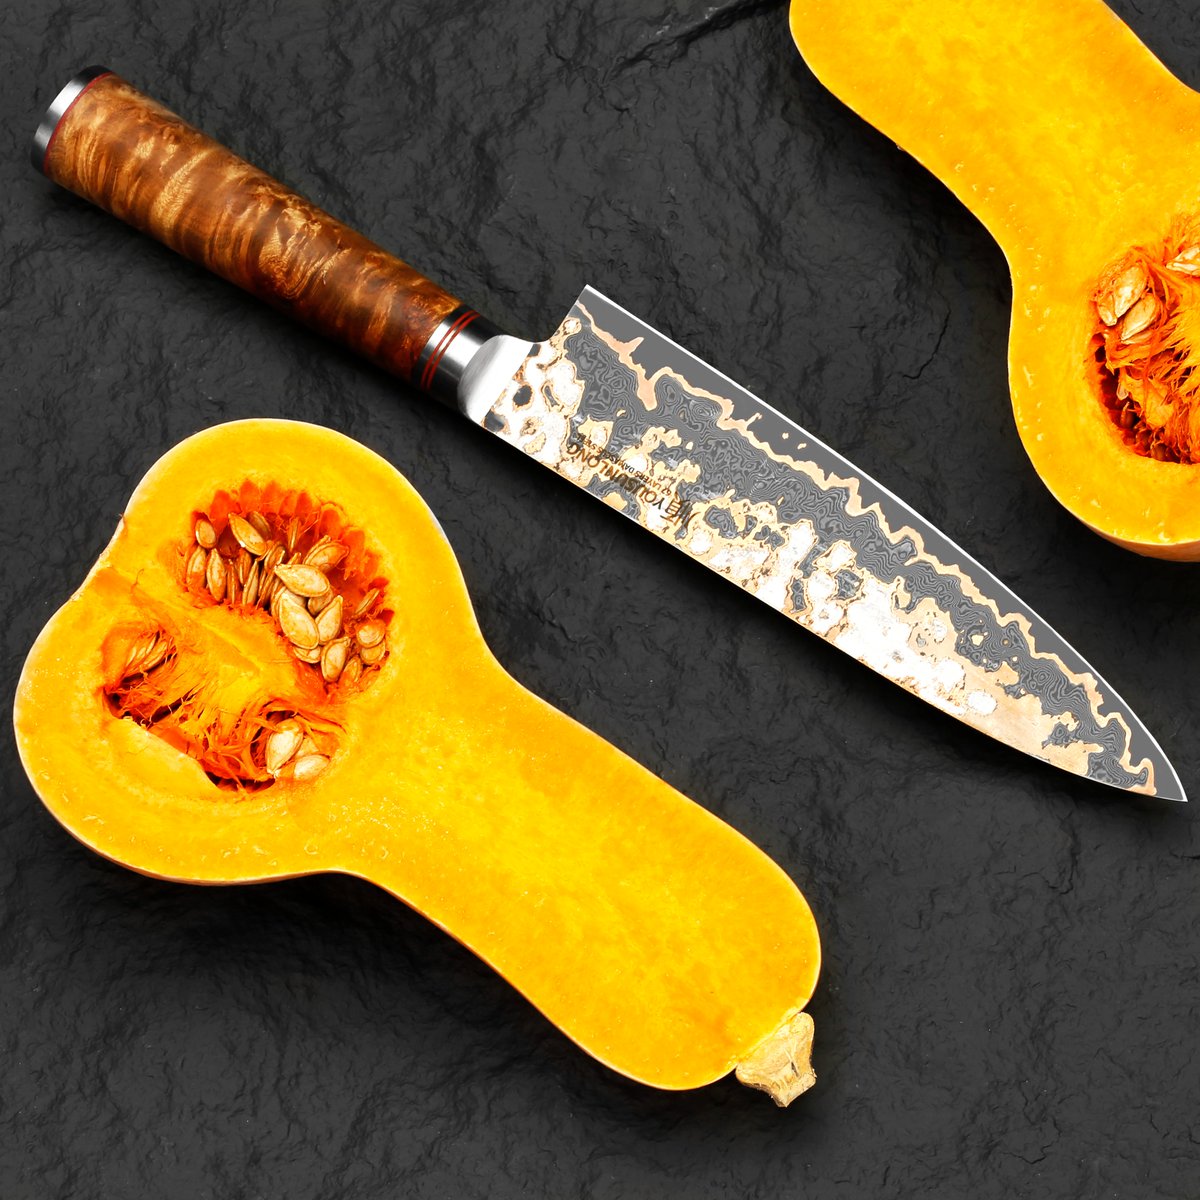 Handcrafted from Japanese Copper Damascus Steel, this professional-grade knife delivers precision and power to your kitchen.

amzn.to/3UkBNHc

#yousunlong #yousunlongknife #chefknife #kitchenessentials #culinaryart #cookingtools #razorsharp #handcrafted #foodie #cheflife